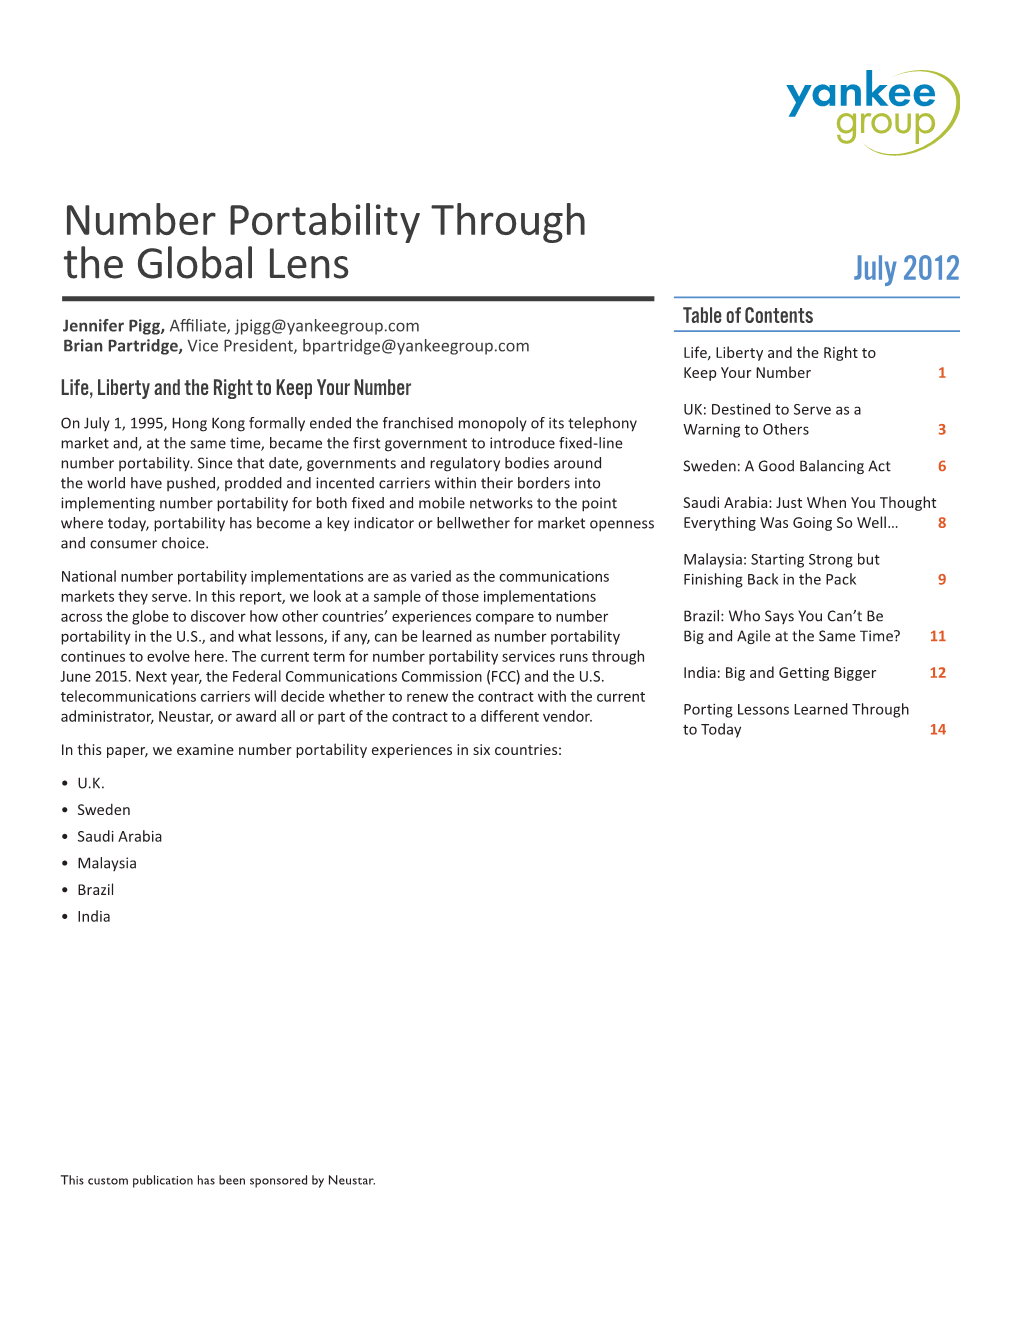 Number Portability Through the Global Lens July 2012